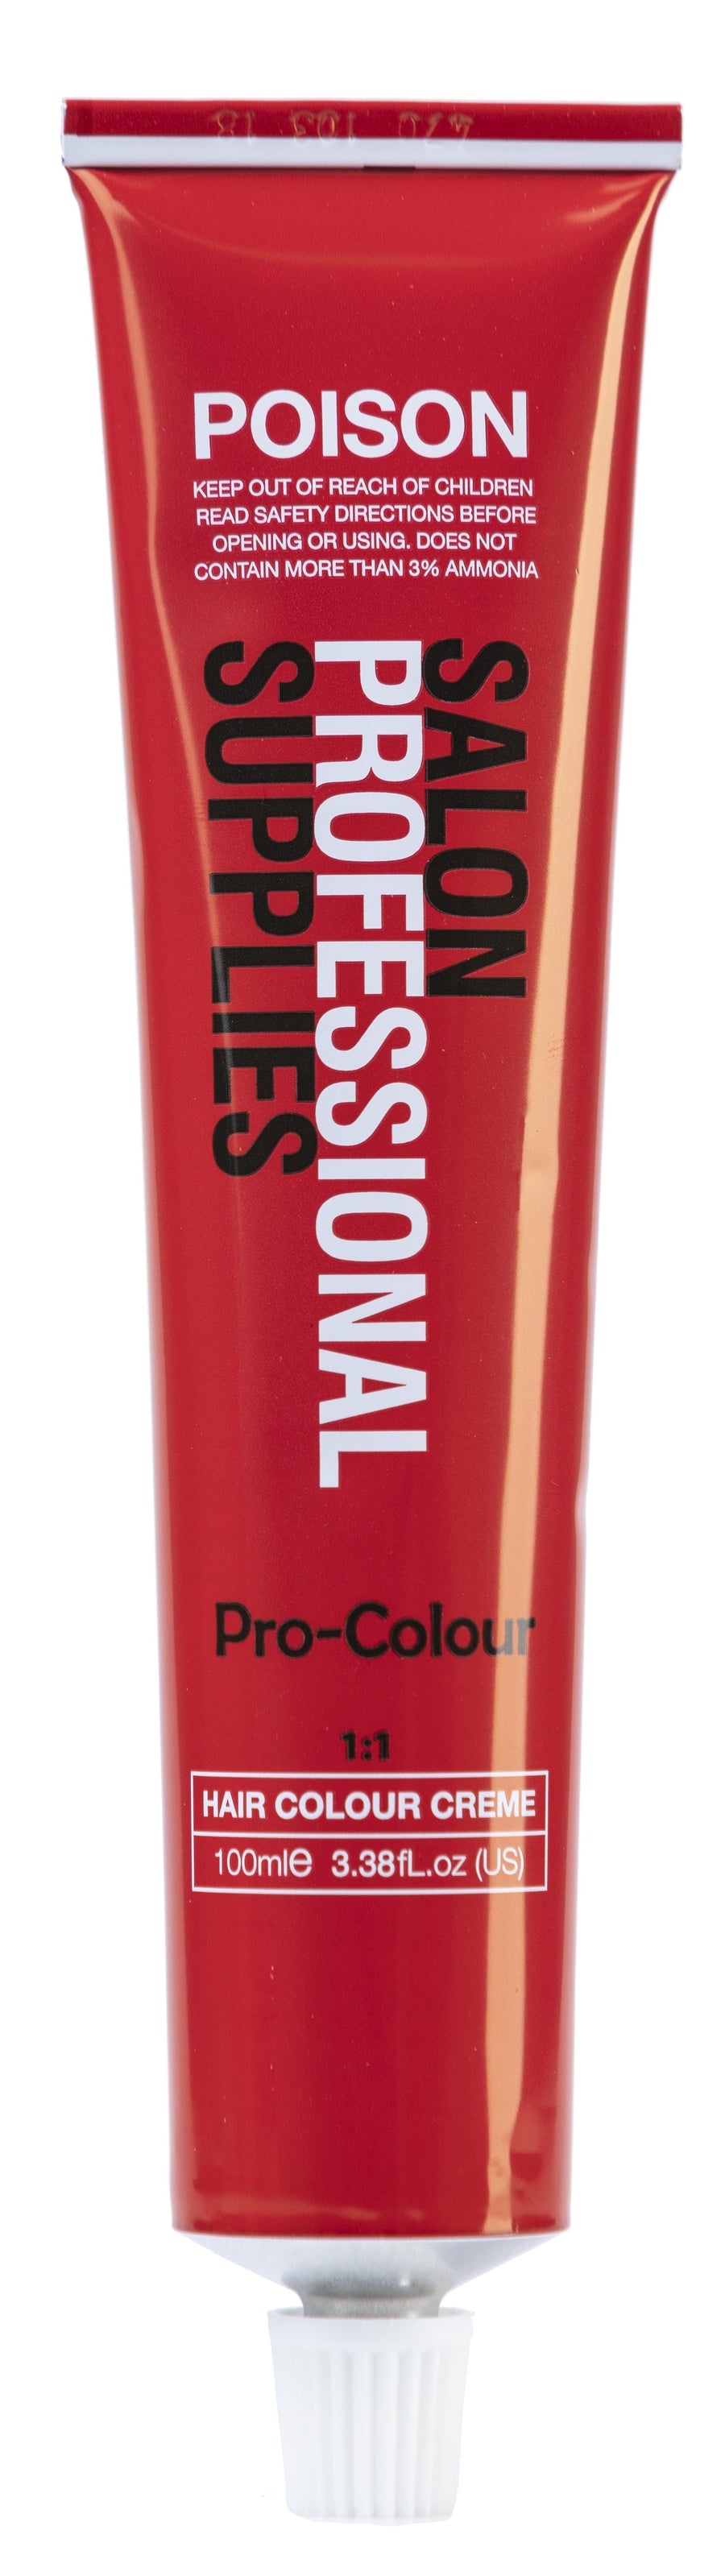 SPS Tint 88.44 Extra Light Intense Copper Blonde 100ml - Price Attack